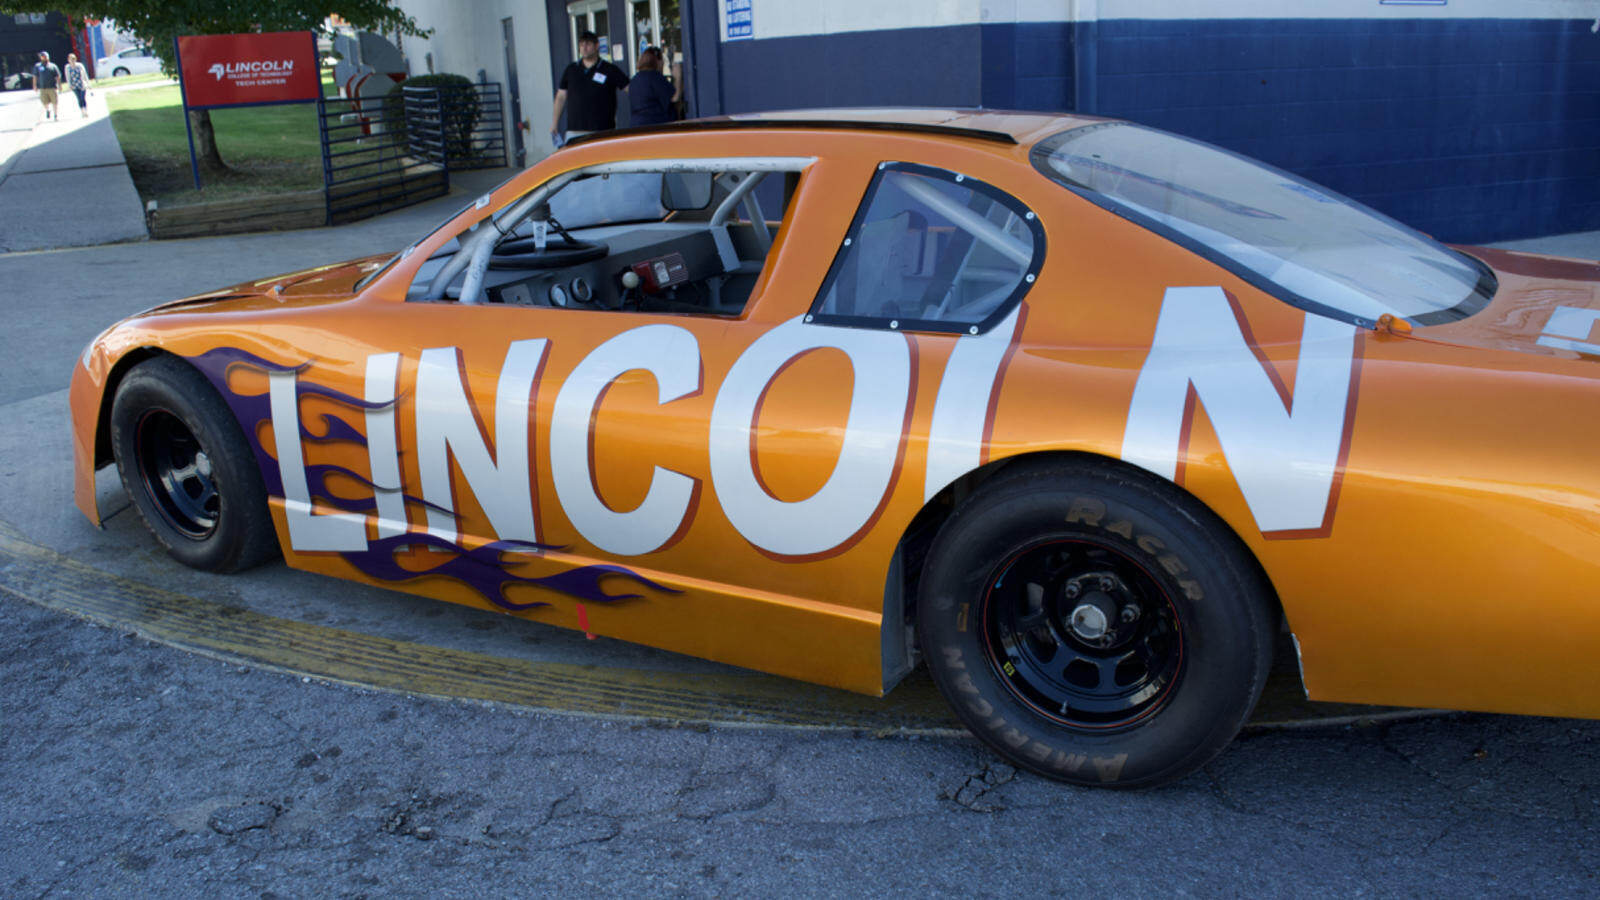 The Lincoln Tech Stock Car is Displayed at the Nashville 100th Anniversary Event.